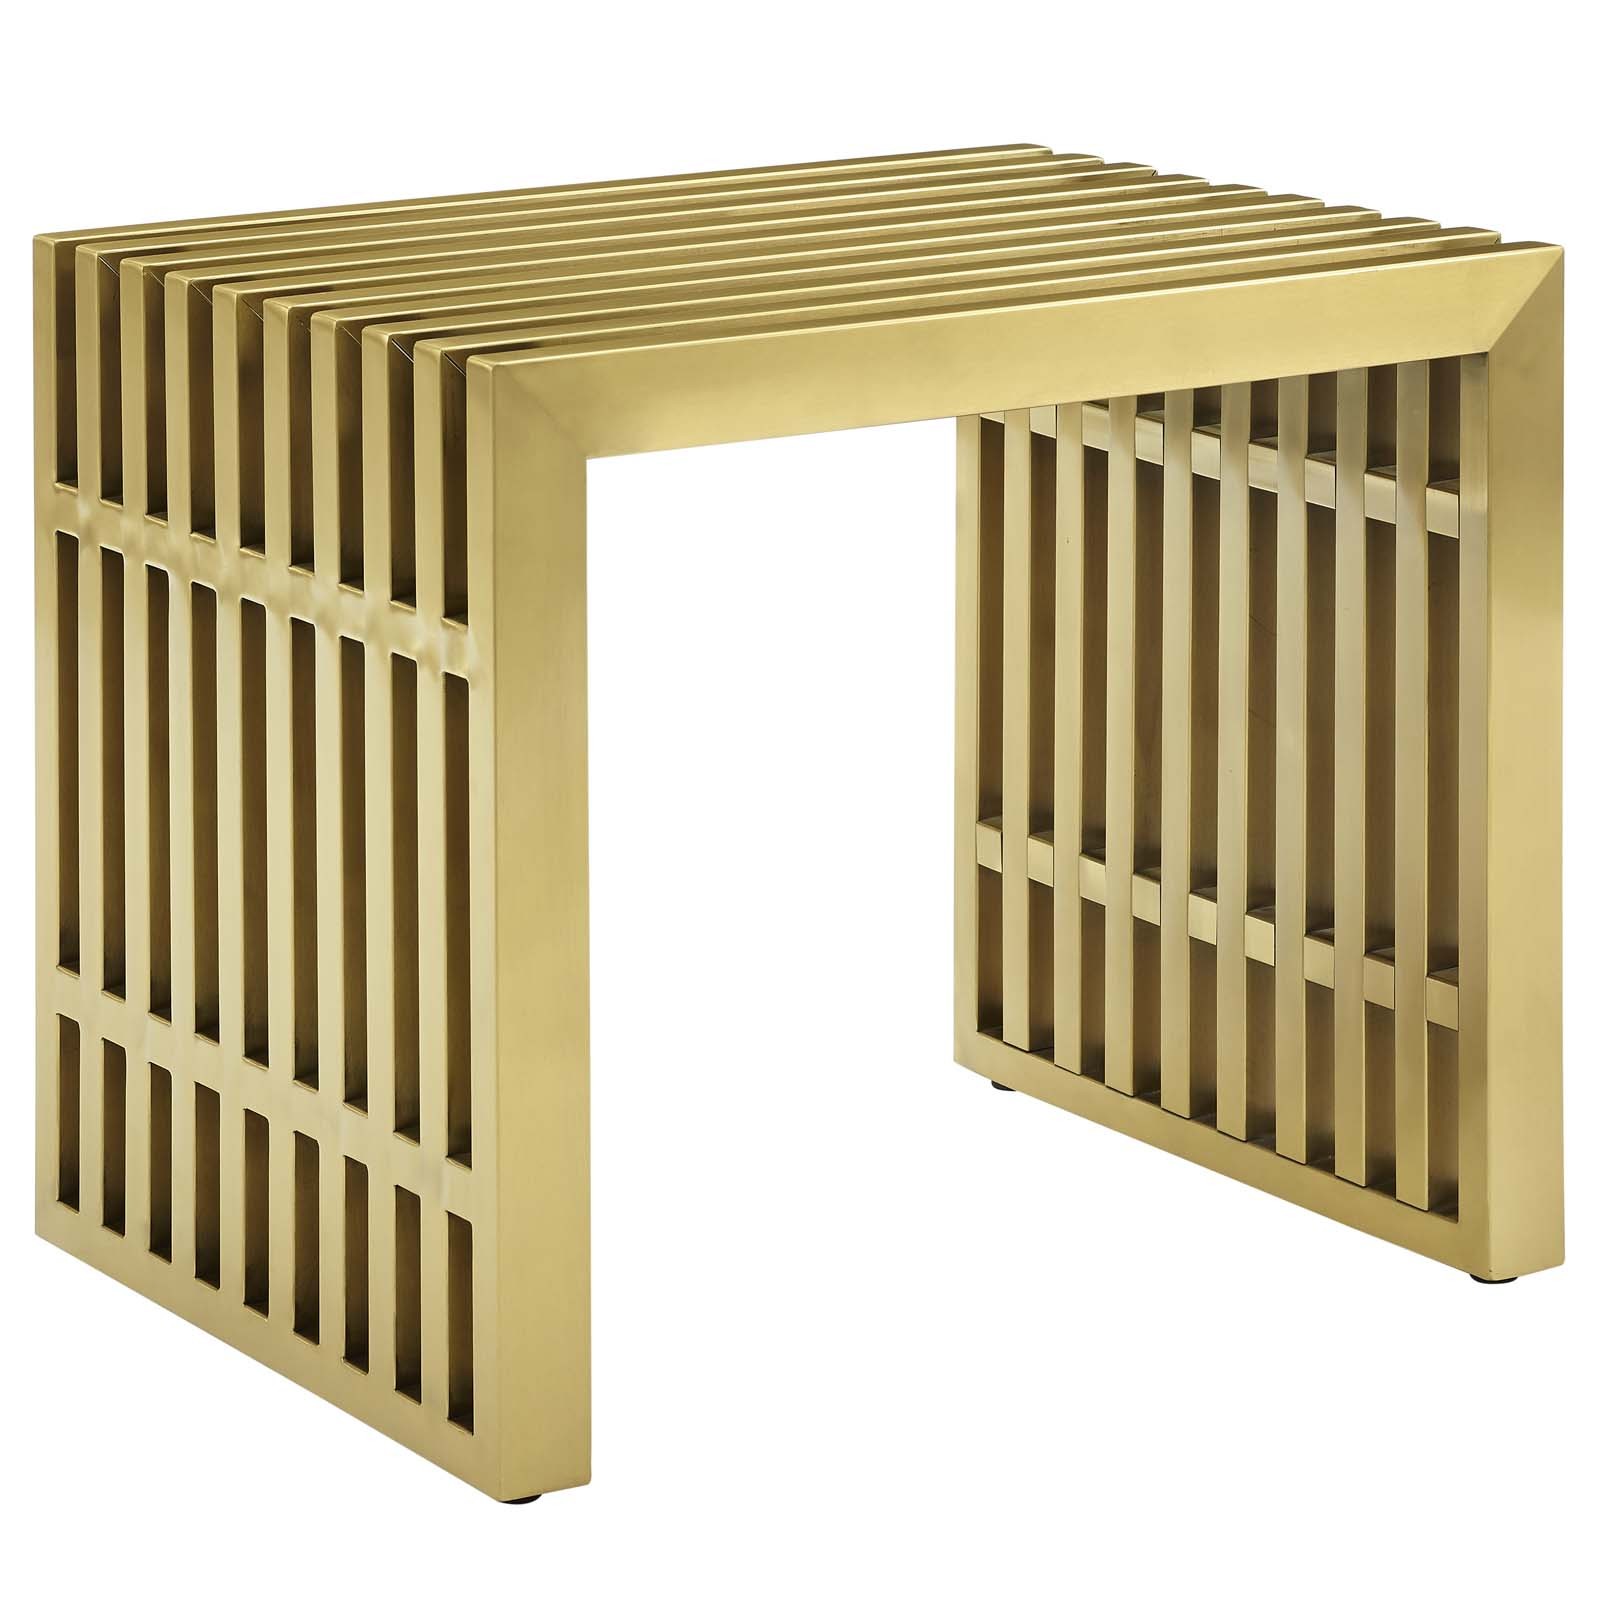 Gridiron Small Stainless Steel Bench in Gold